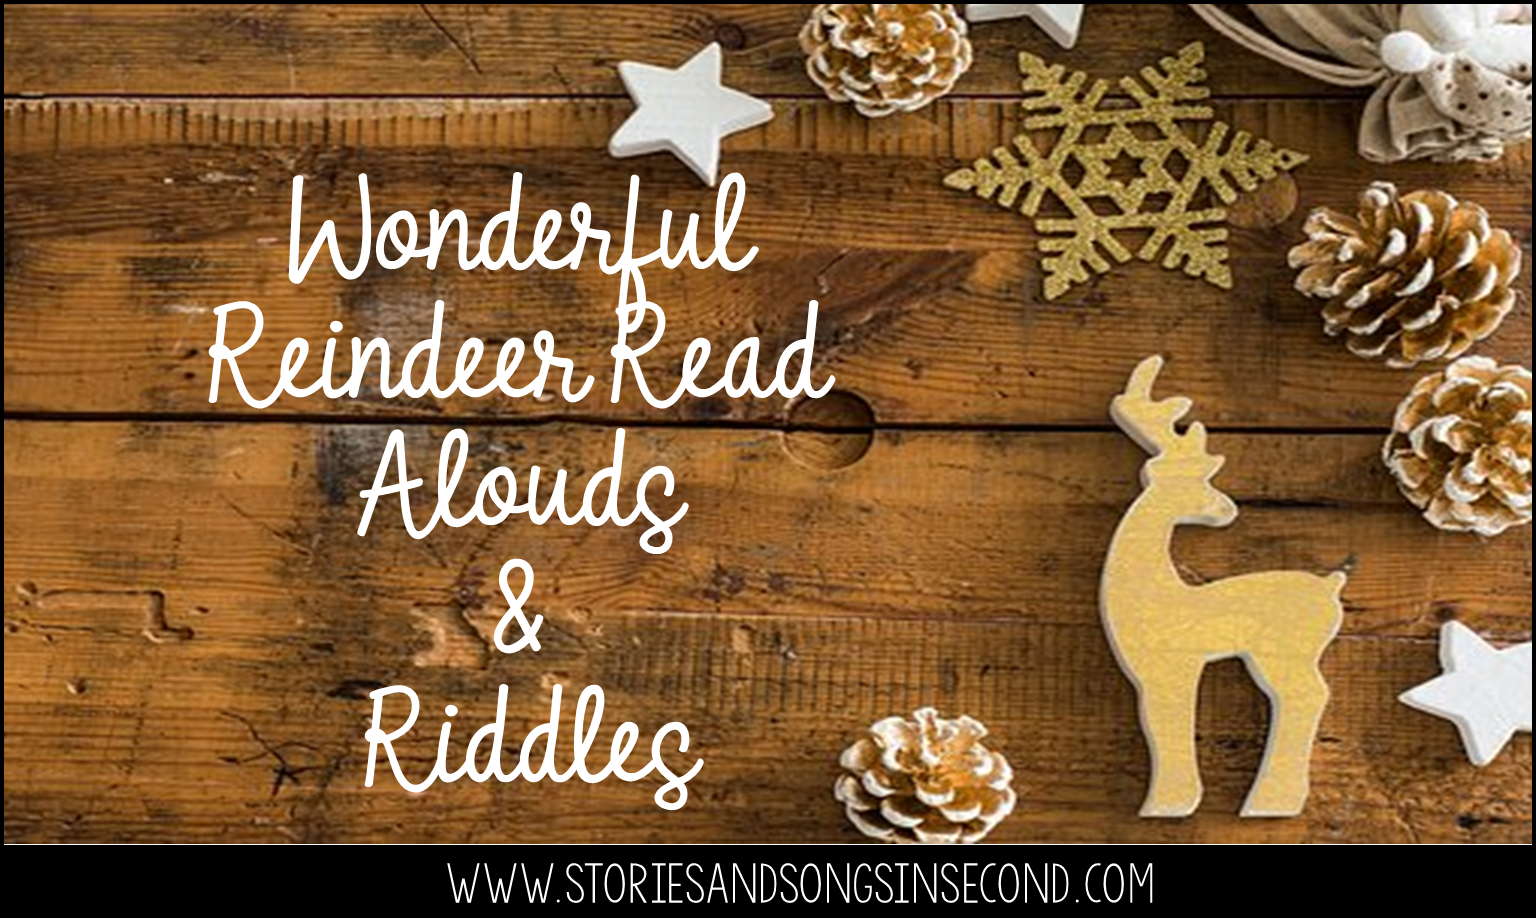 Primary grade students will love reading and writing about real-life reindeer, as well as the team that pulls Santa's sleigh! Find links to resources and activities that are just right for theme days in your classroom!